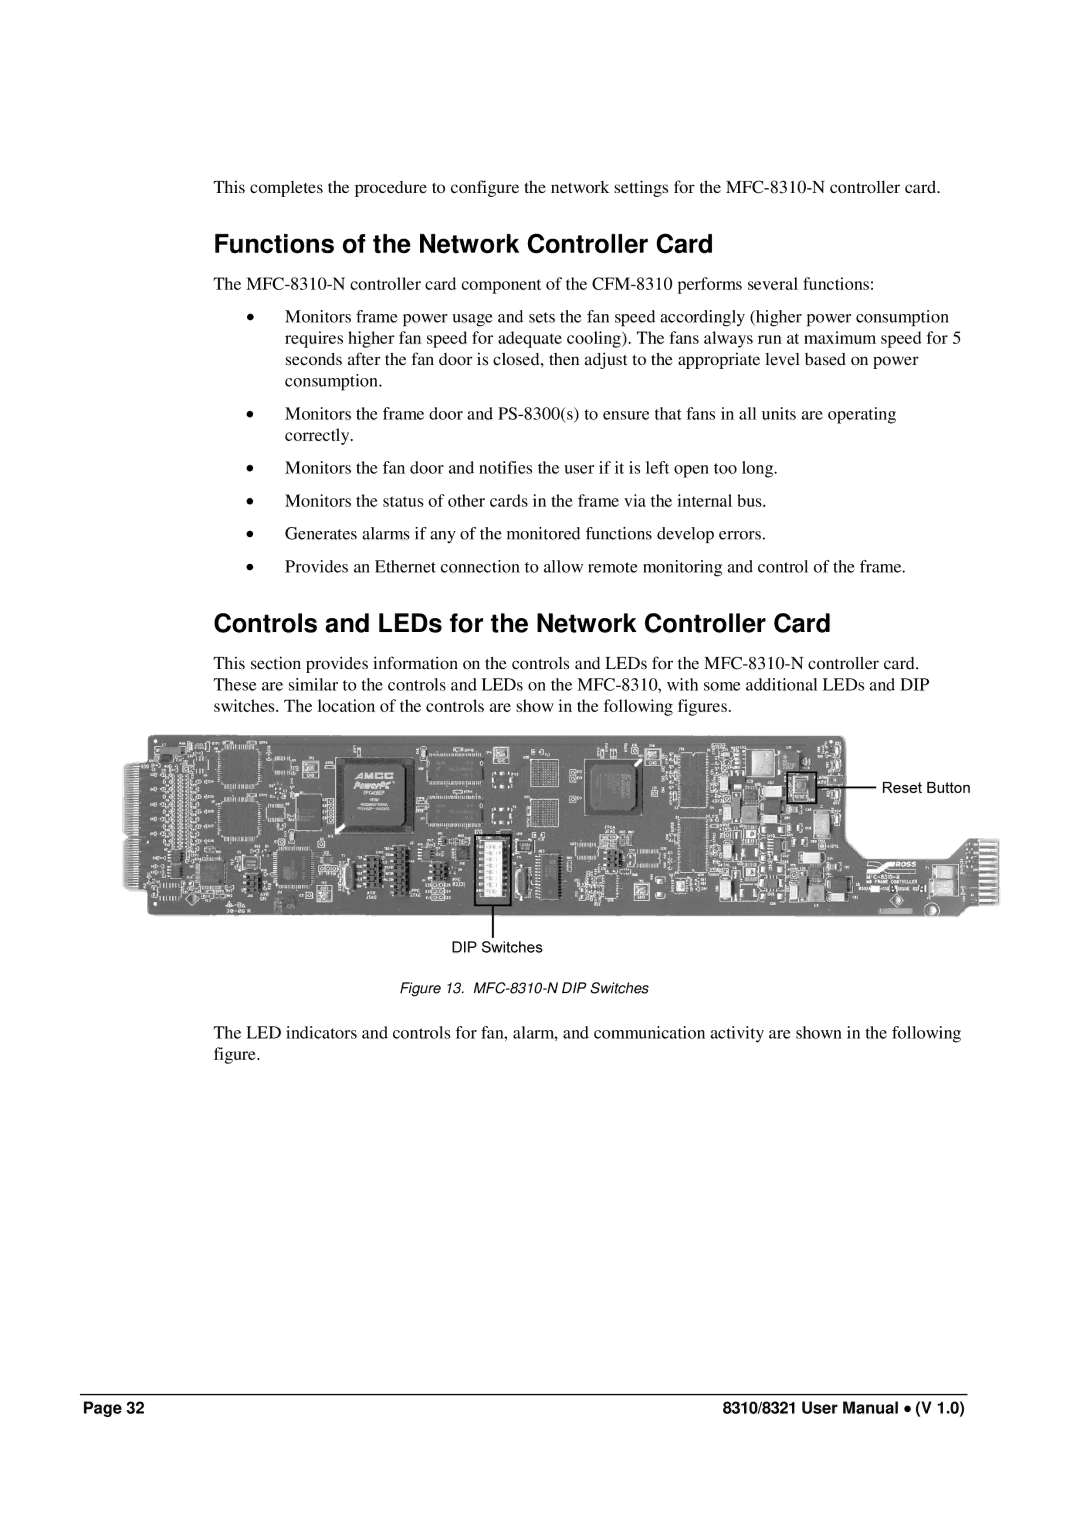 Cobalt Networks 8310(-C) Functions of the Network Controller Card, Controls and LEDs for the Network Controller Card 